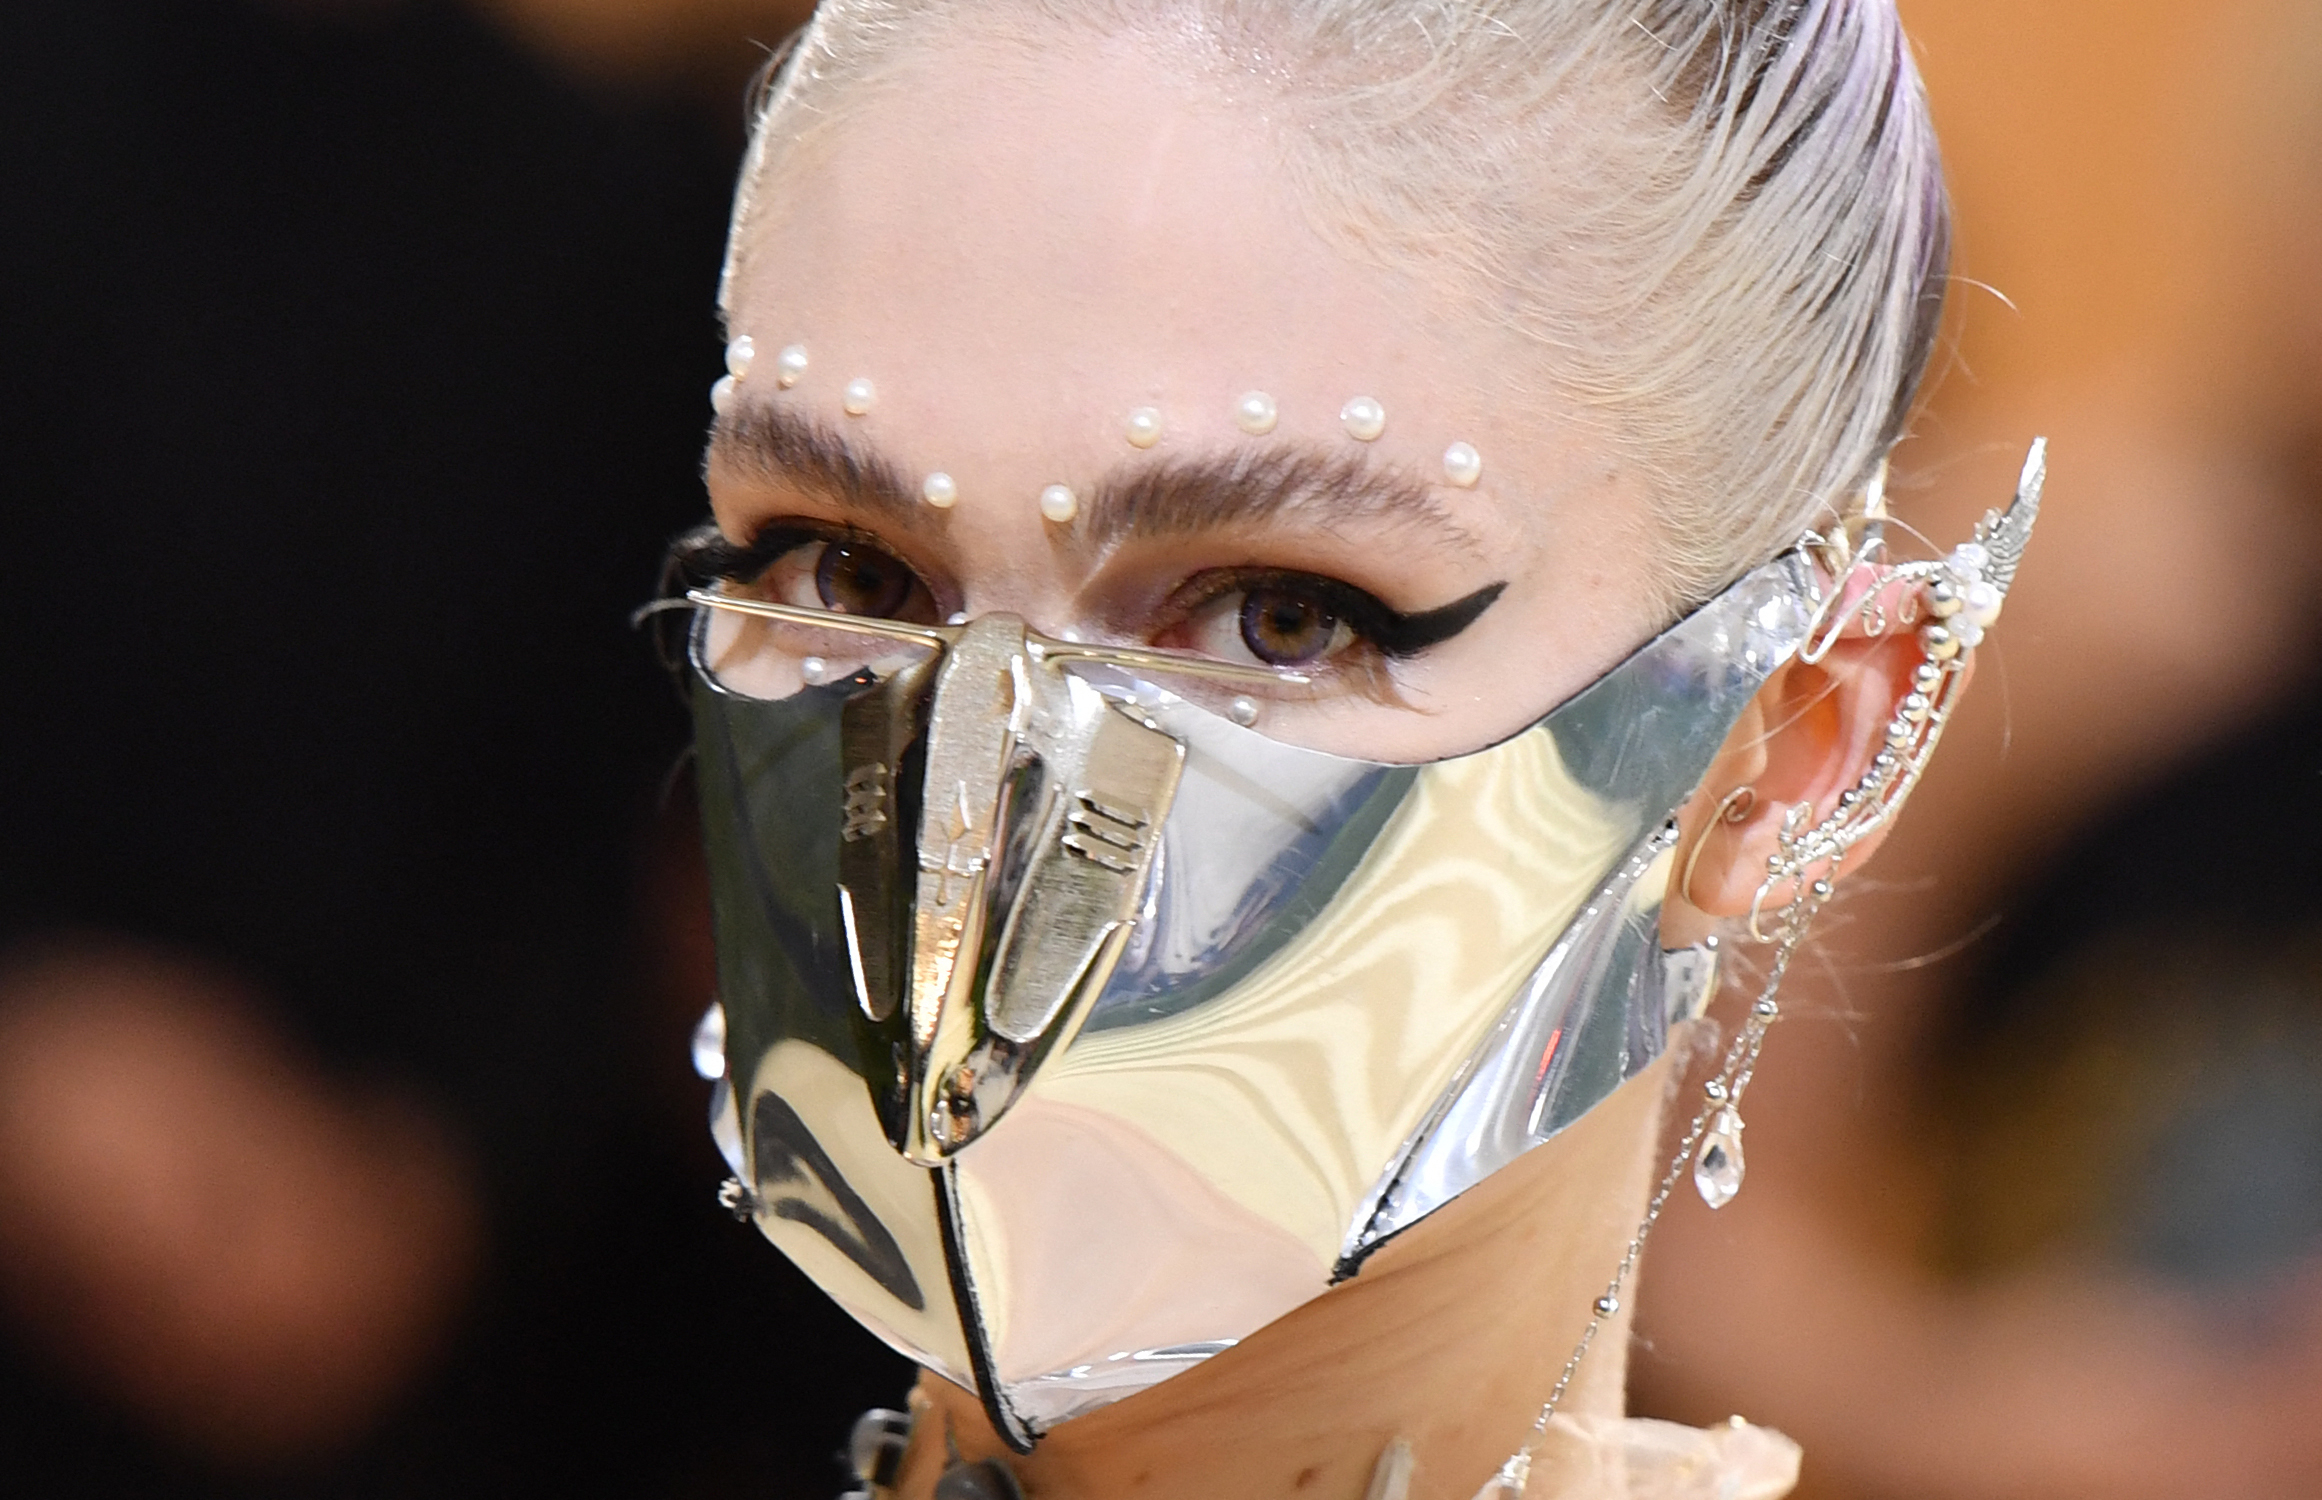 Grimes wearing a metallic mask with pearl adornments on their forehead